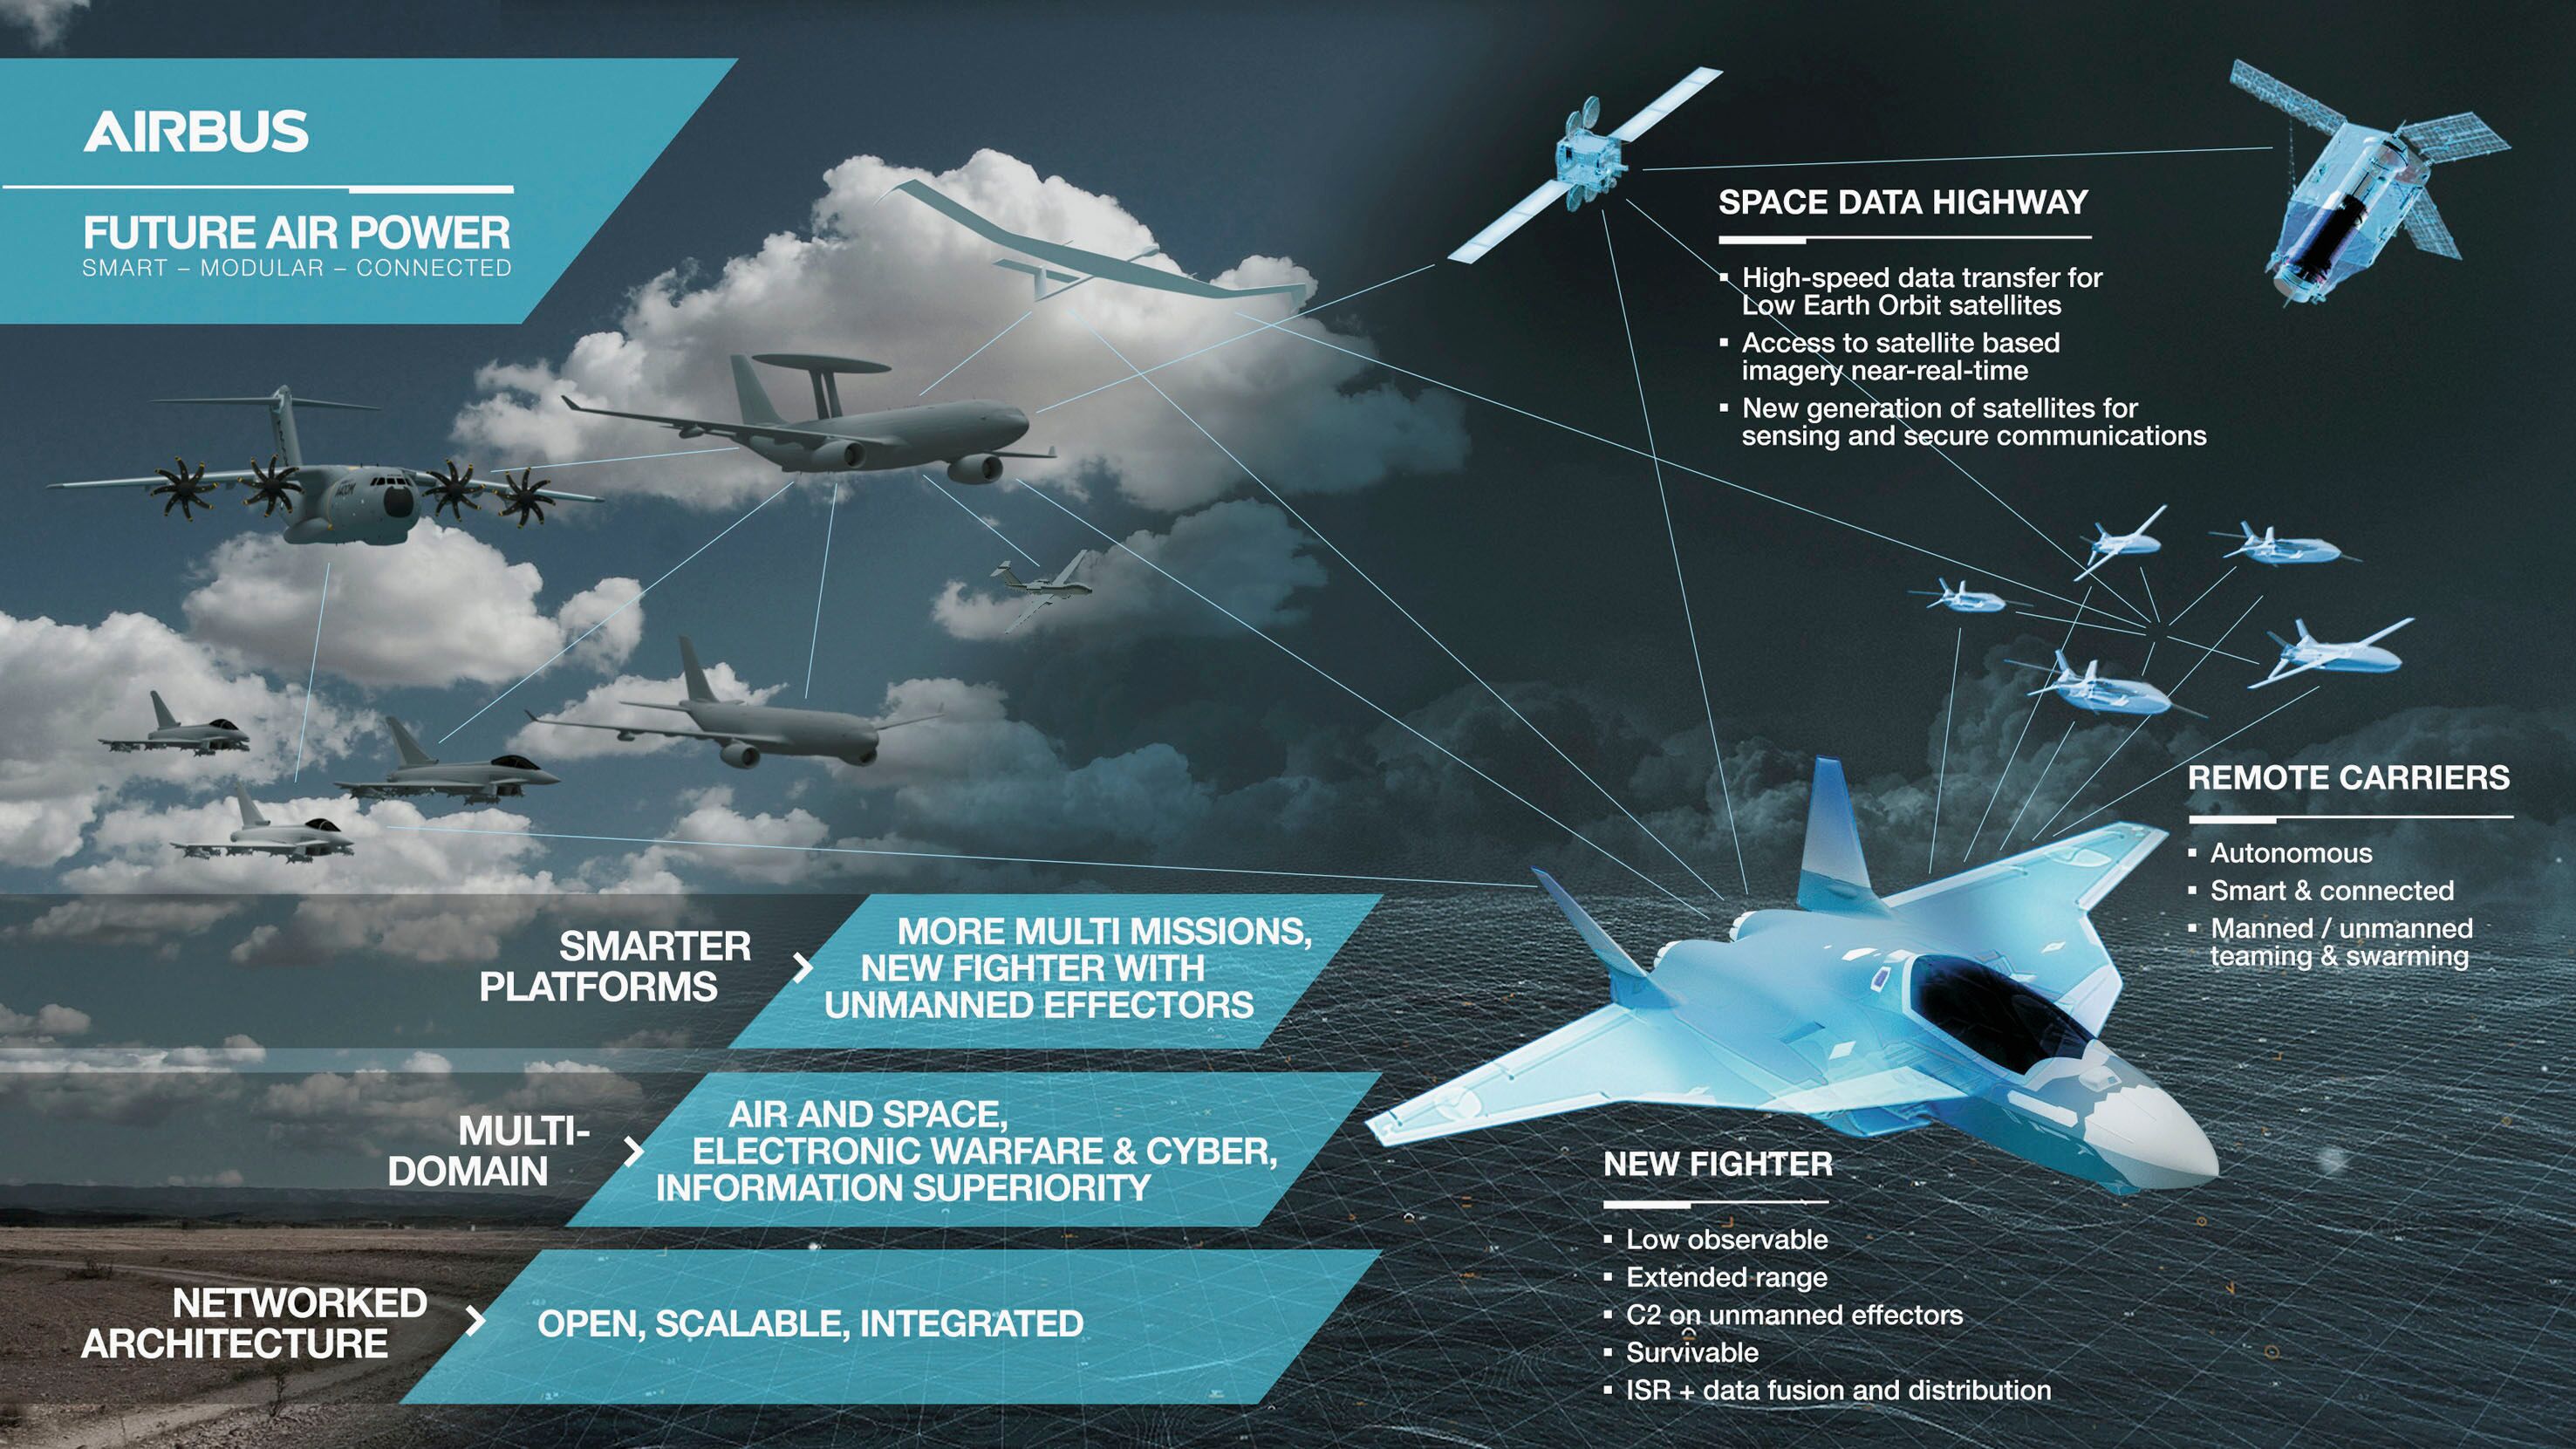 Conceptual art showing the European FCAS system-of-systems being networked together via the Air Combat Cloud. With Airbus leading development of this European cloud, Airbus DS in the UK is looking to channel this expertise and knowledge into the UK's FCAS project also to ensure future interoperability. (Airbus)